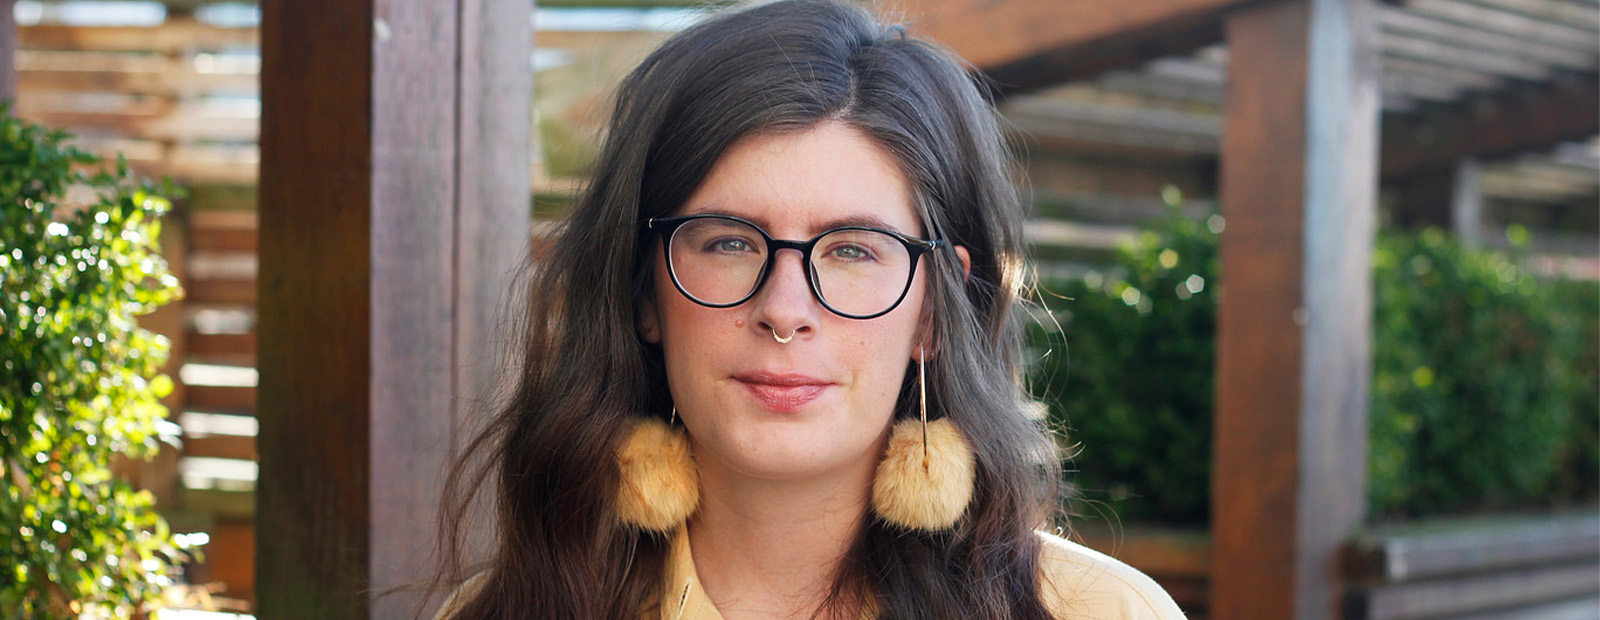 A headshot of Jessica Johns. She has dark brown hair, wears glasses, a yellow shirt and matching yellow earrings with pompoms